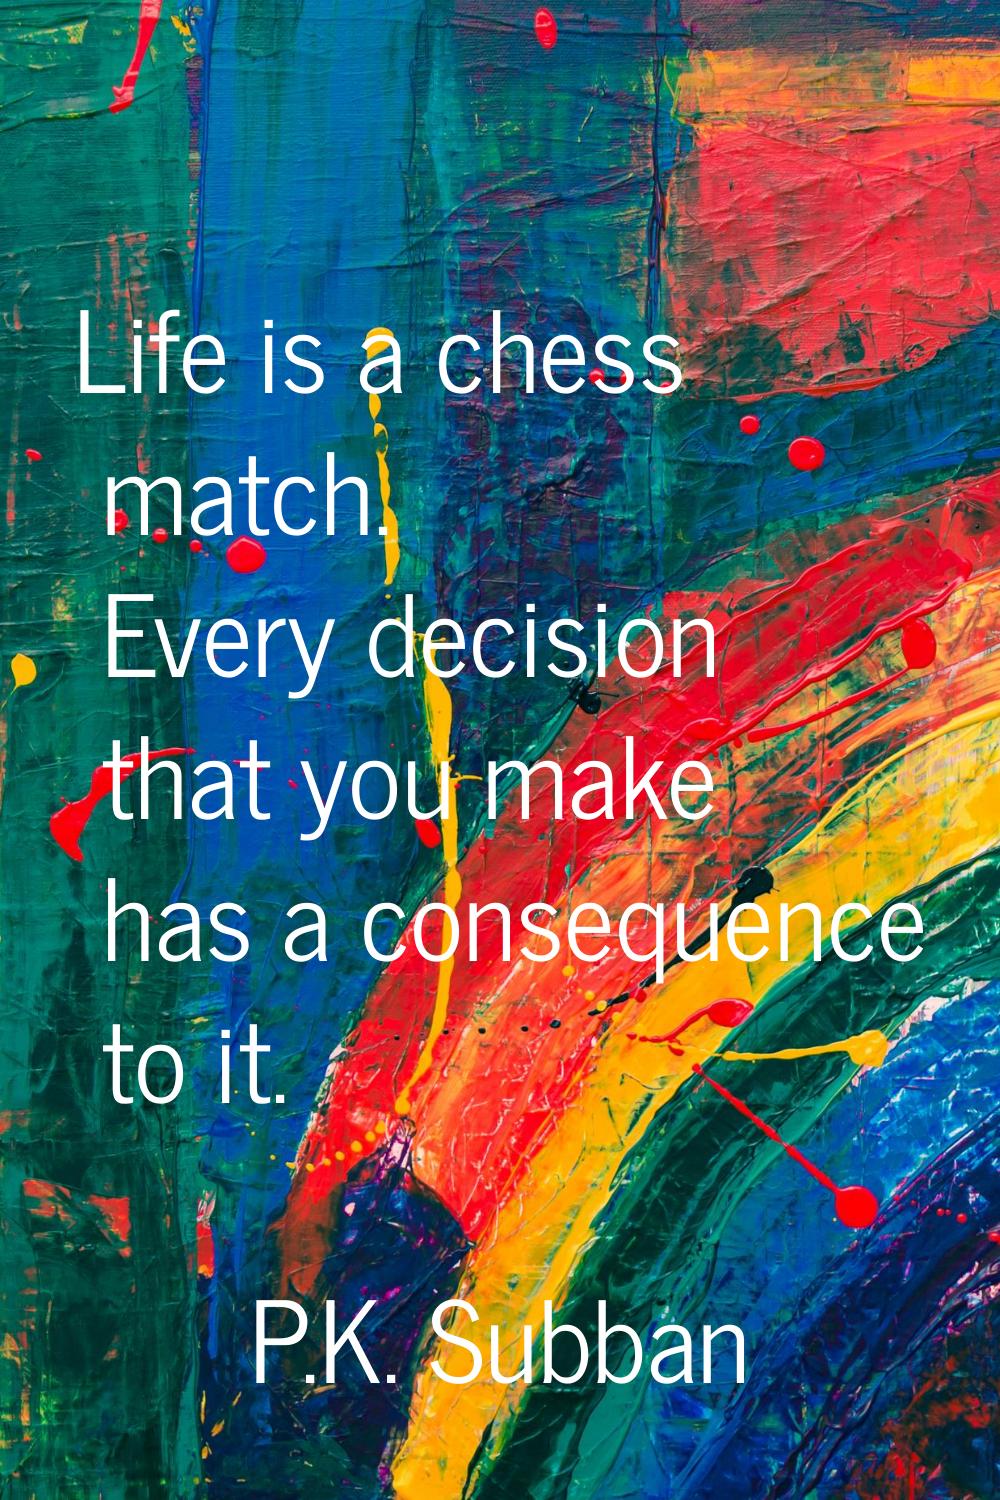 Life is a chess match. Every decision that you make has a consequence to it.